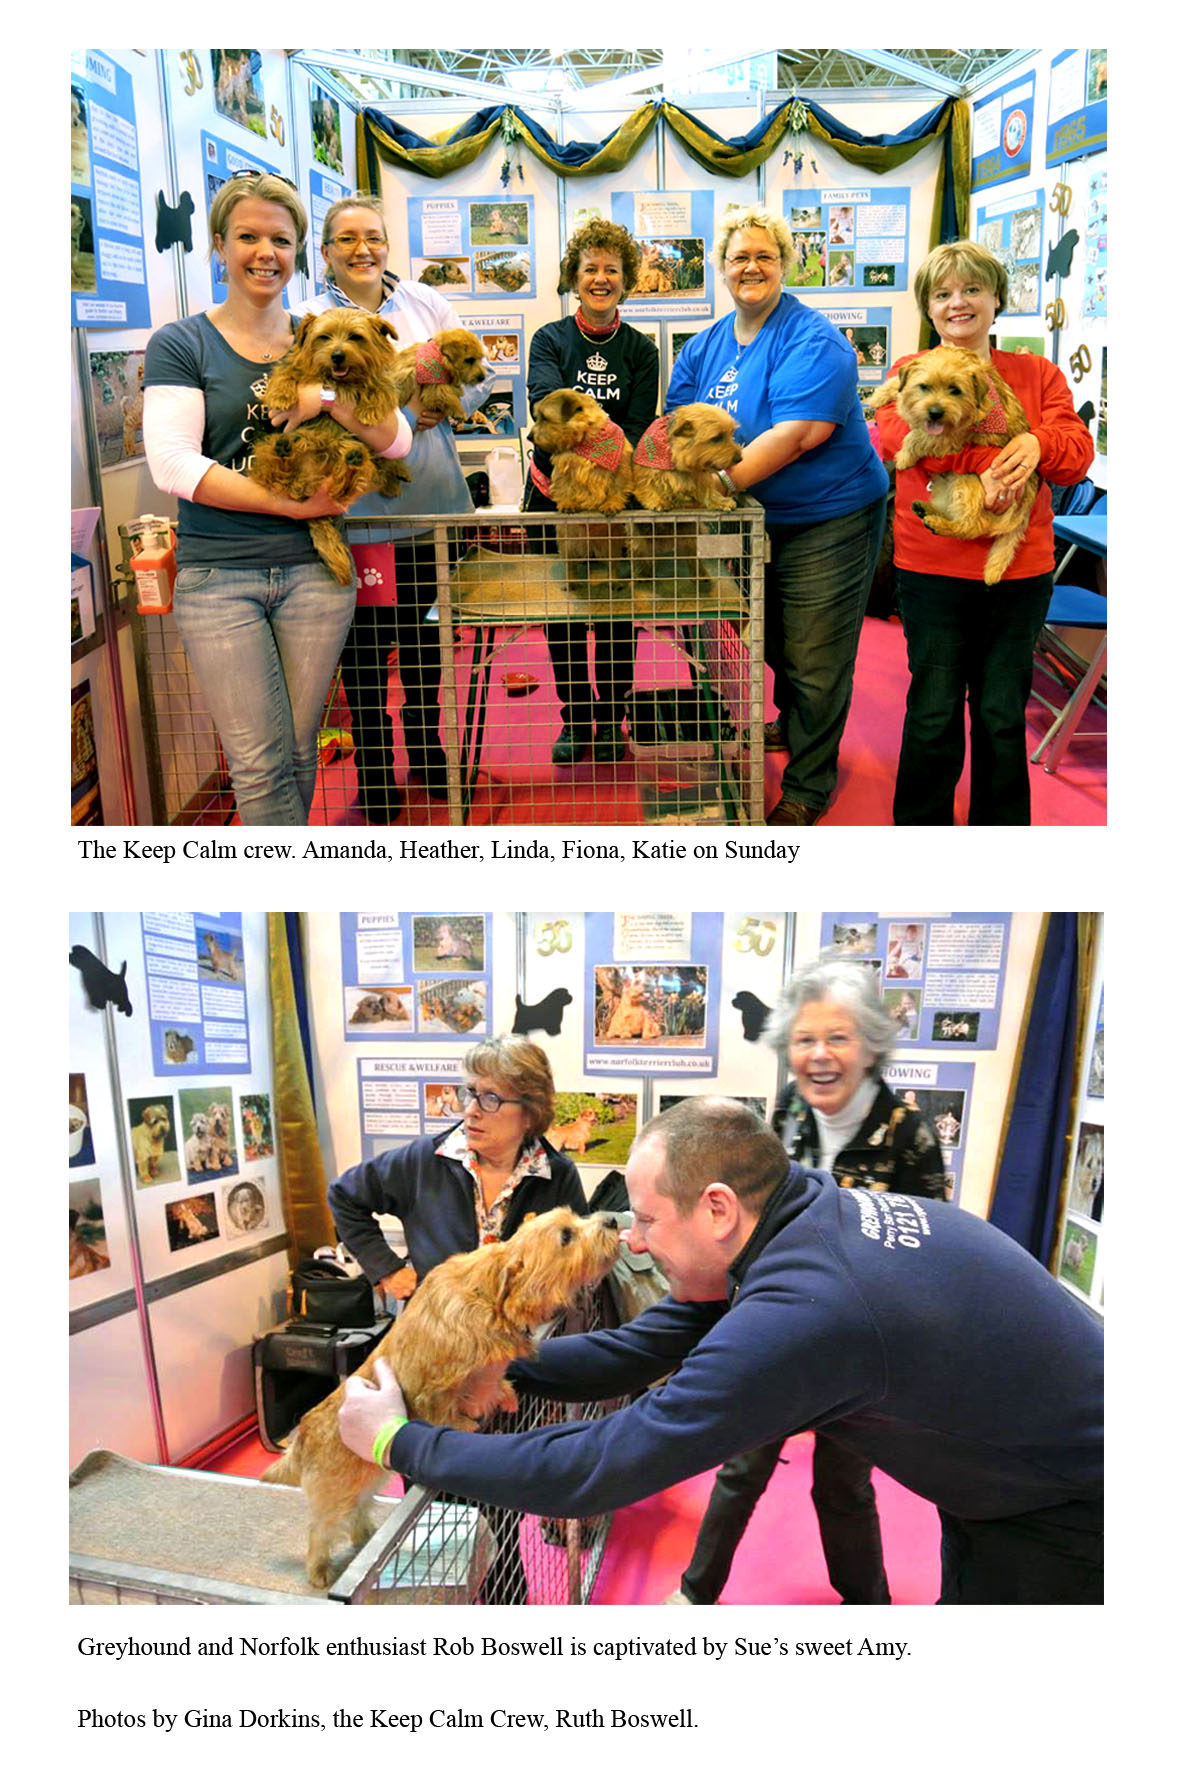 Discover Dogs 2014 Crufts